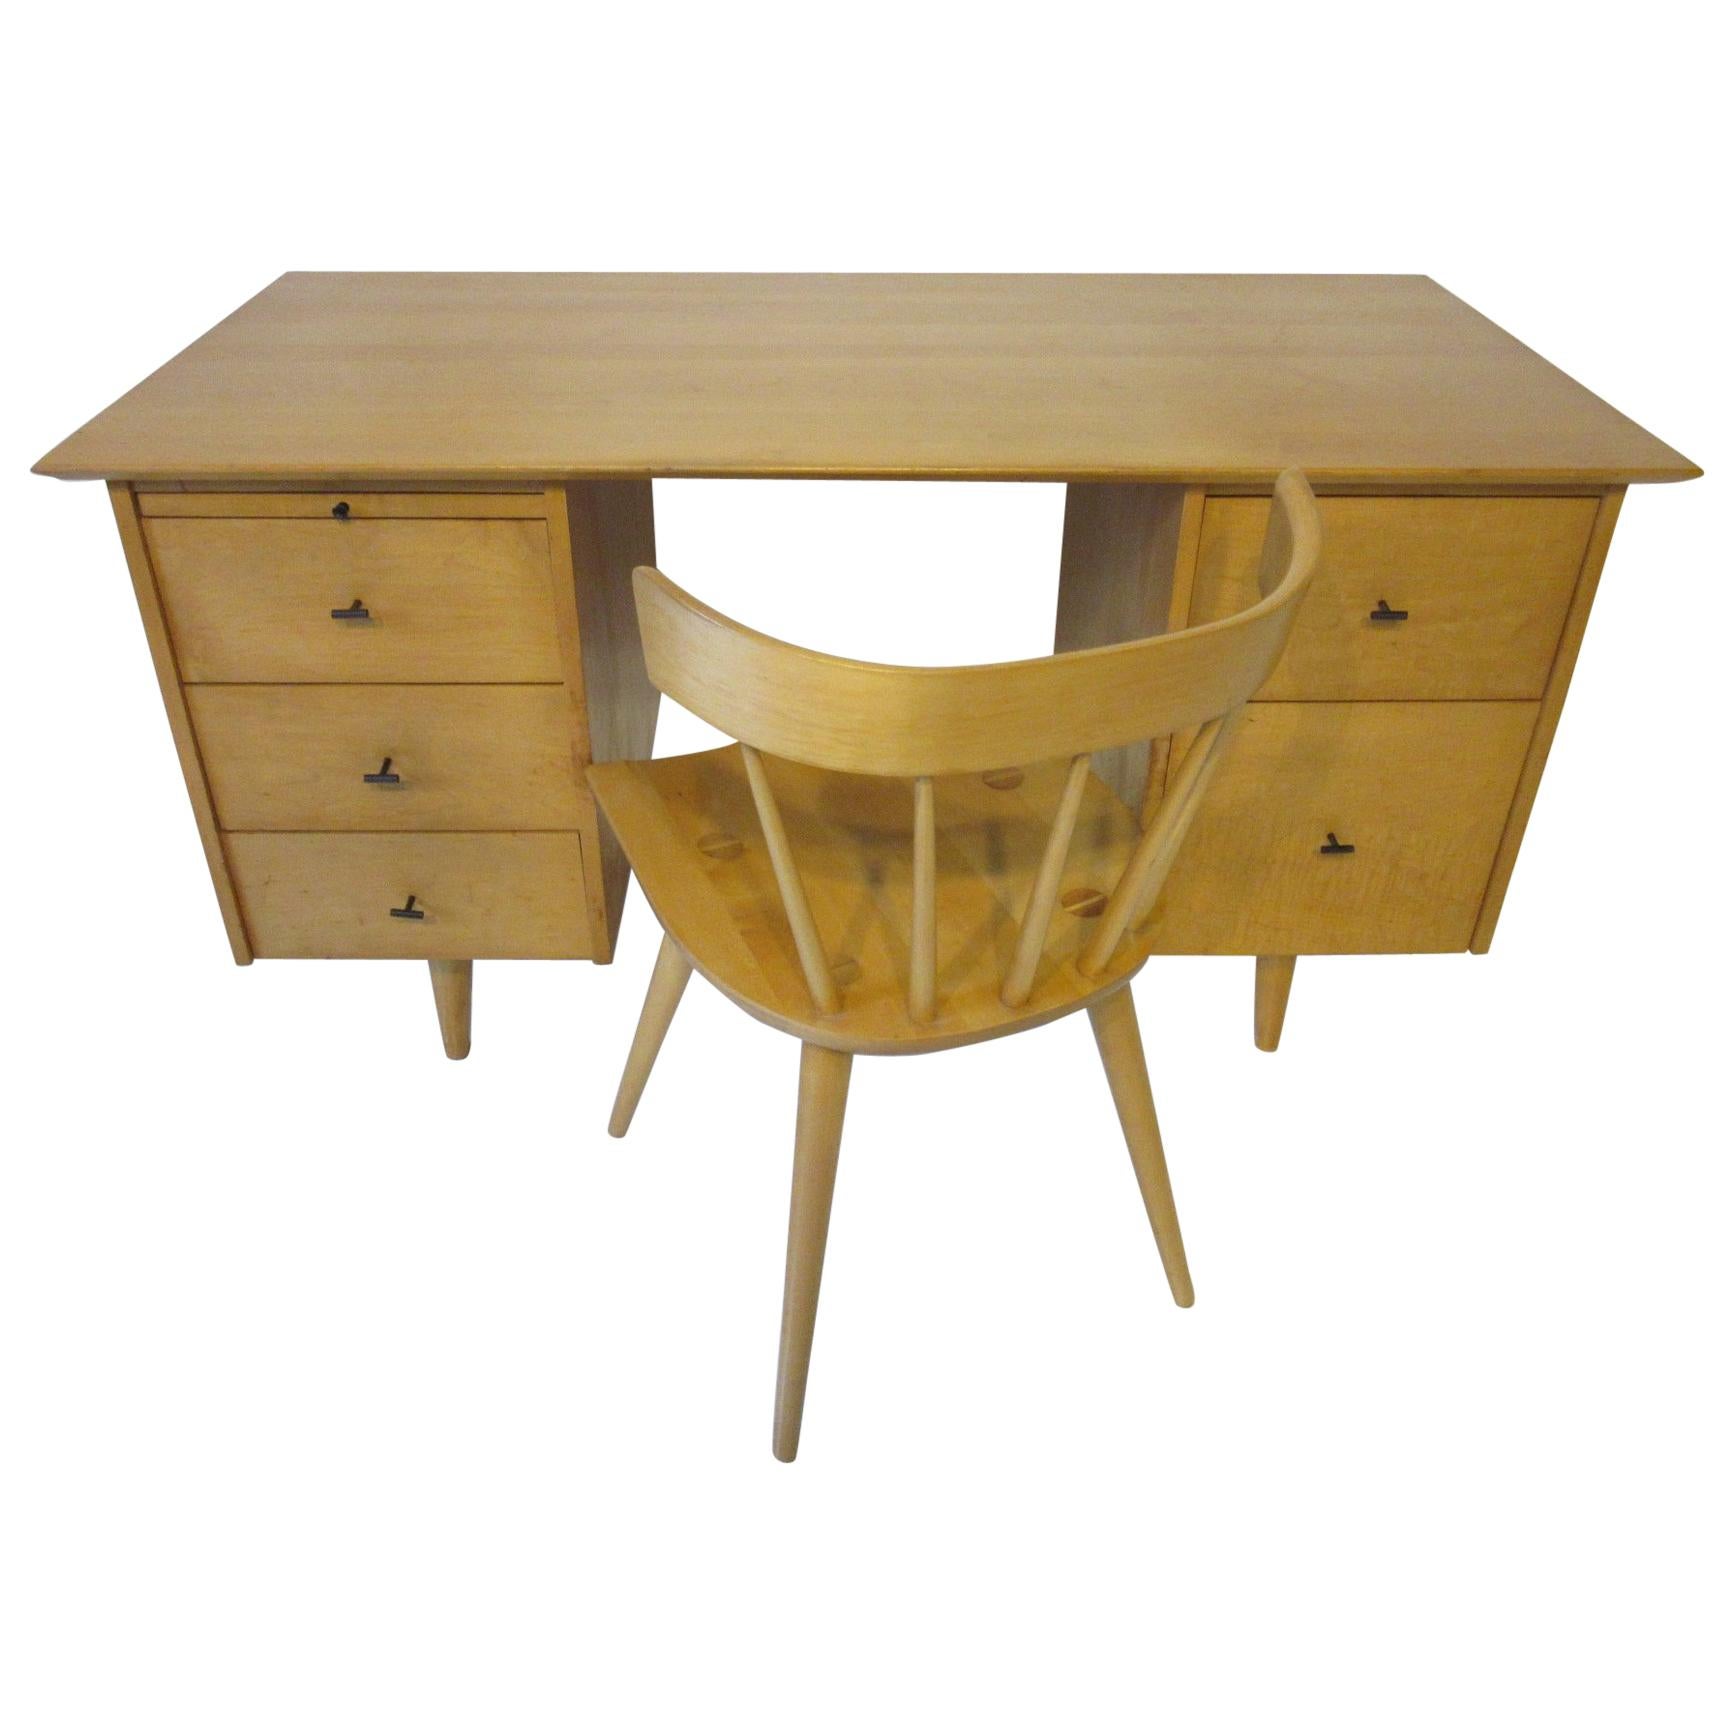 Paul McCobb Desk and Chair from the Planner Group 